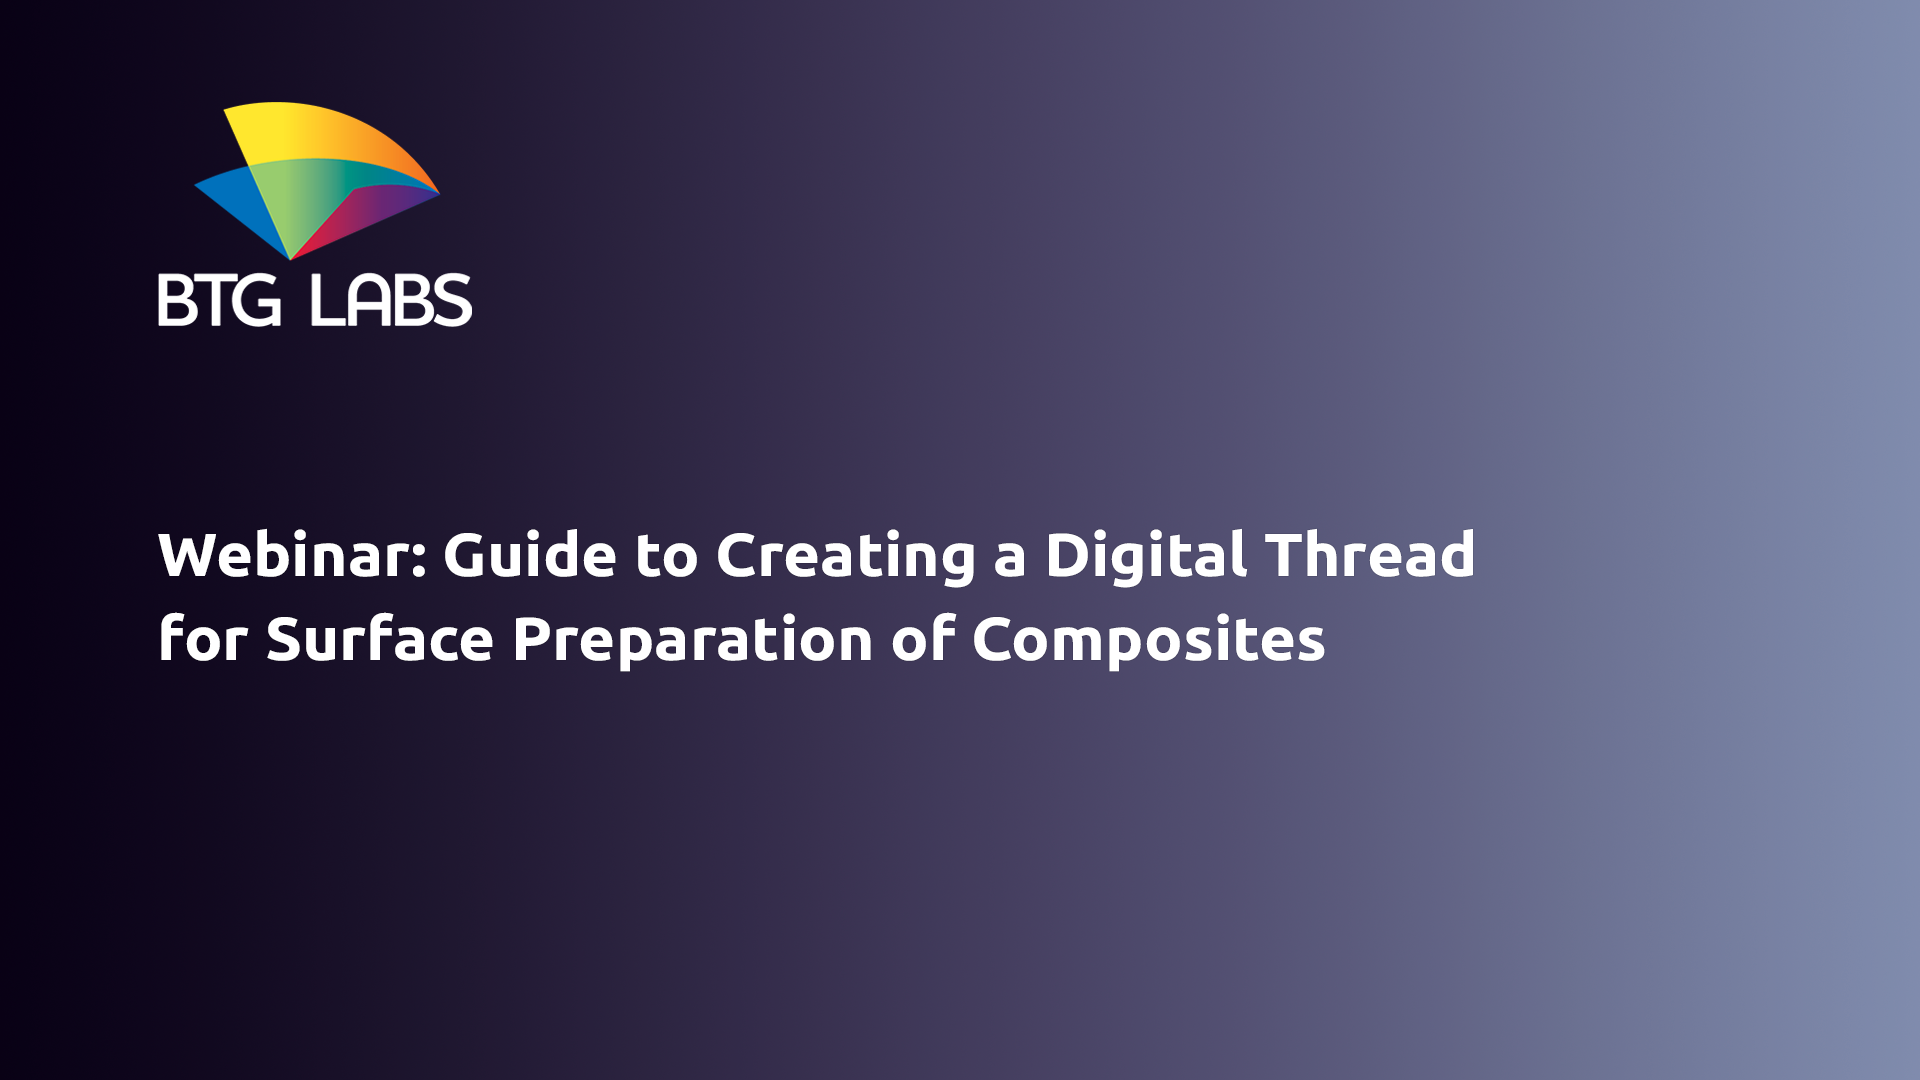 Guide to Creating a Digital Thread for Surface Preparation of Composites